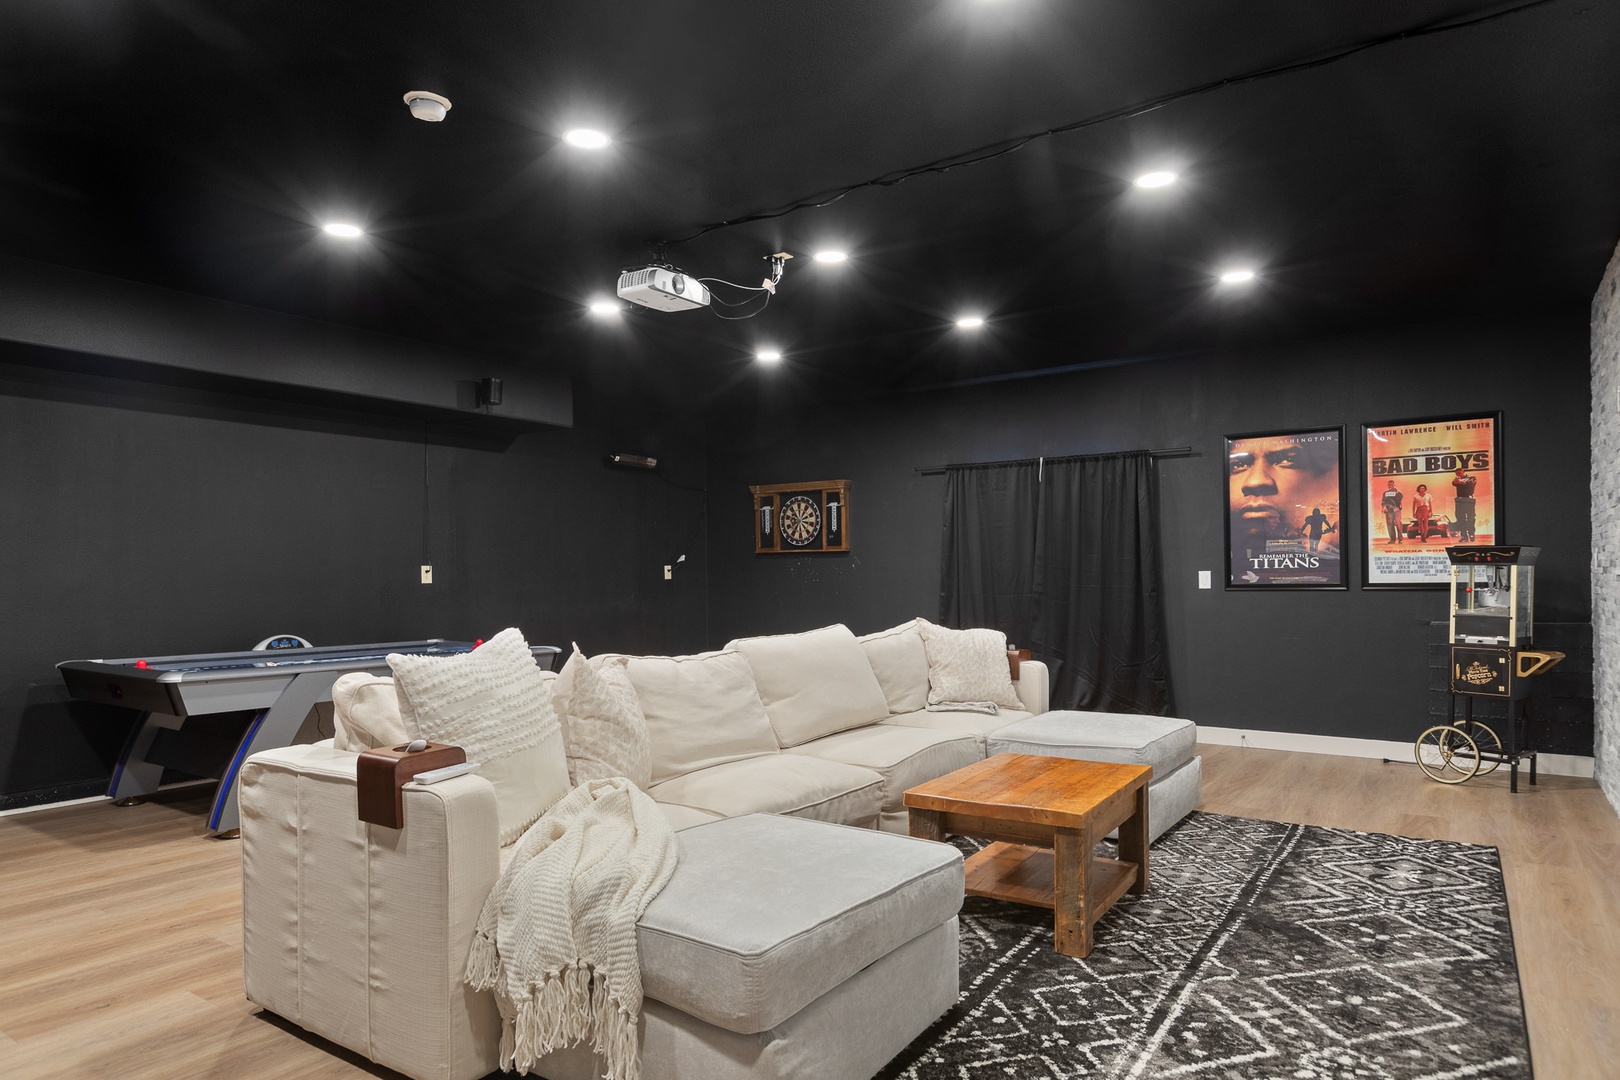 Your own personal movie theater